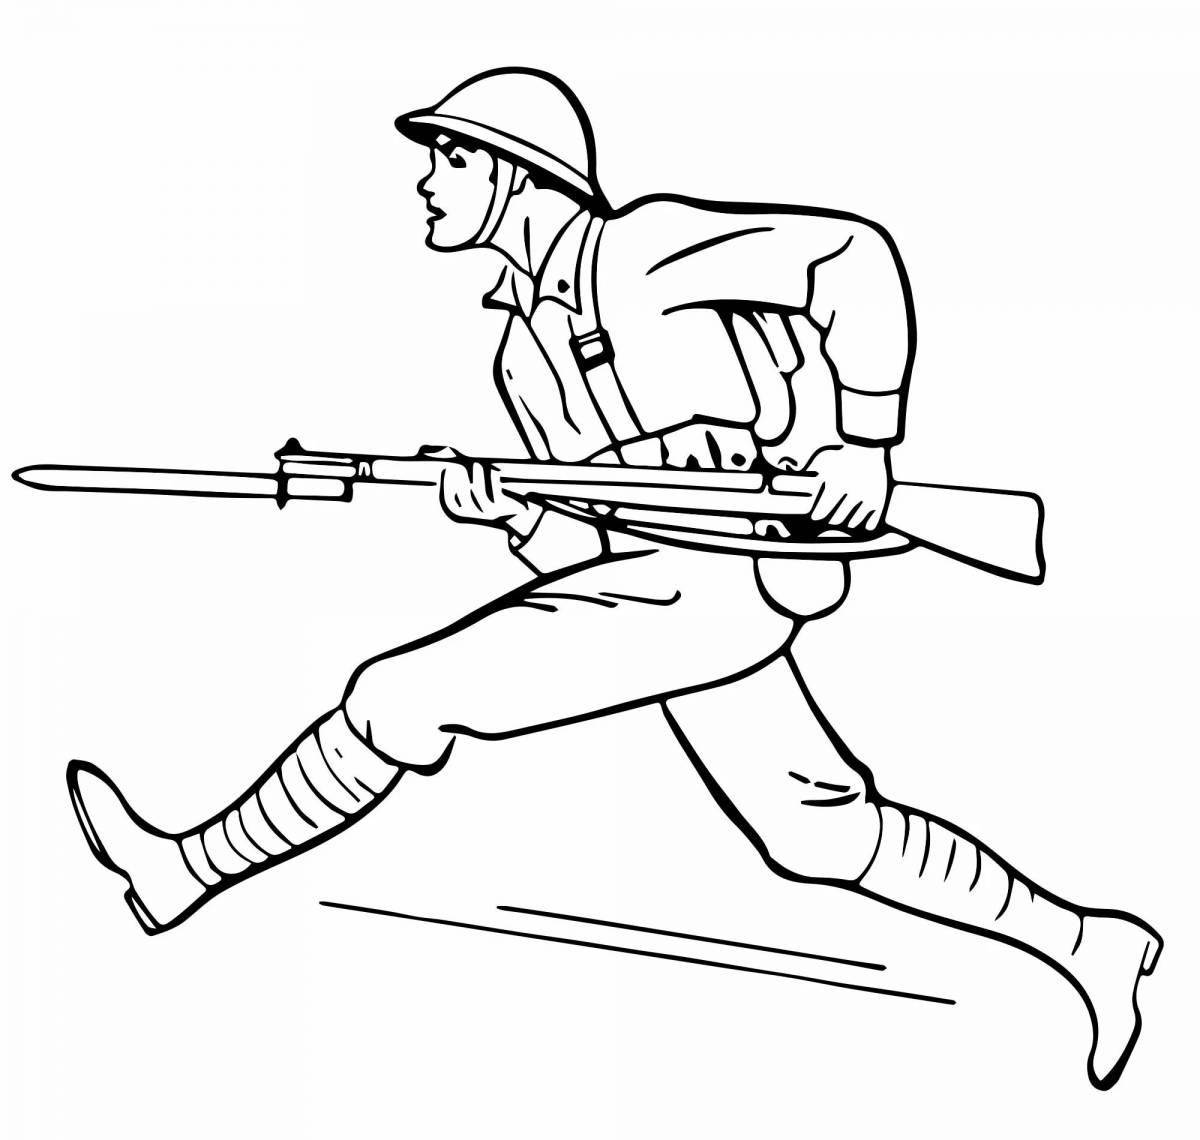 Children's infantry coloring book for kids